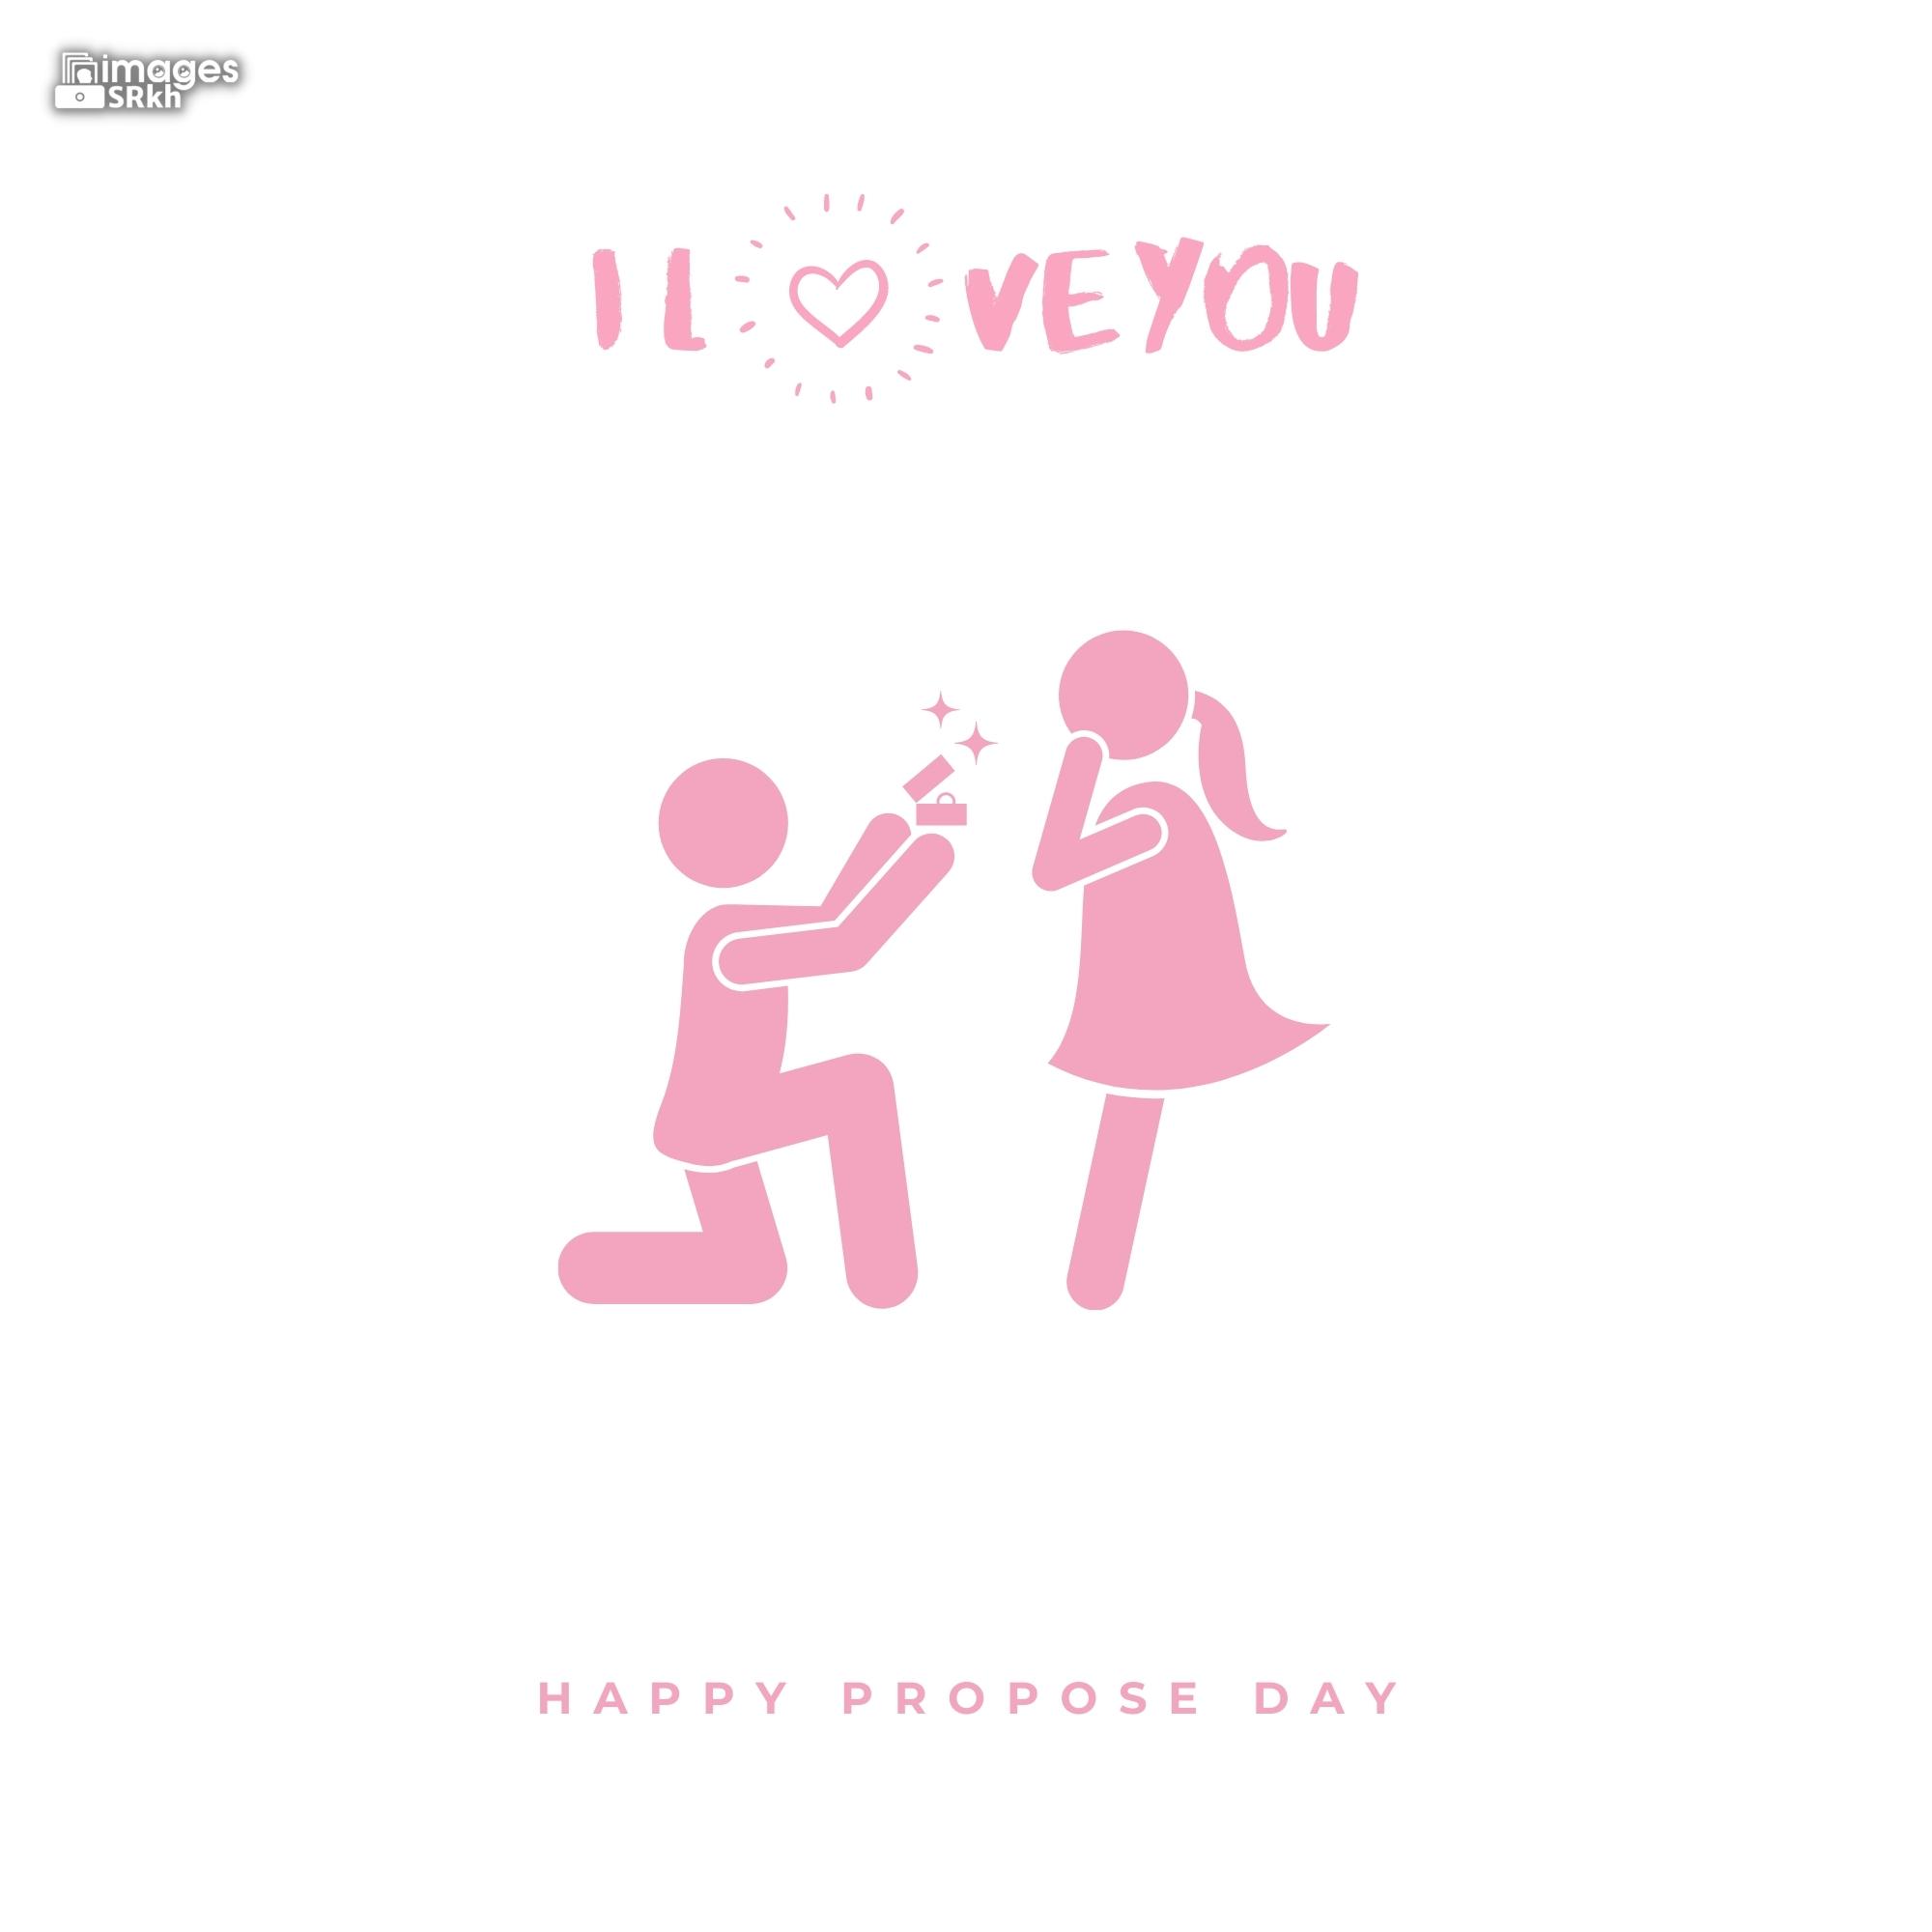 Happy Propose Day Images | 371 | I LOVE YOU